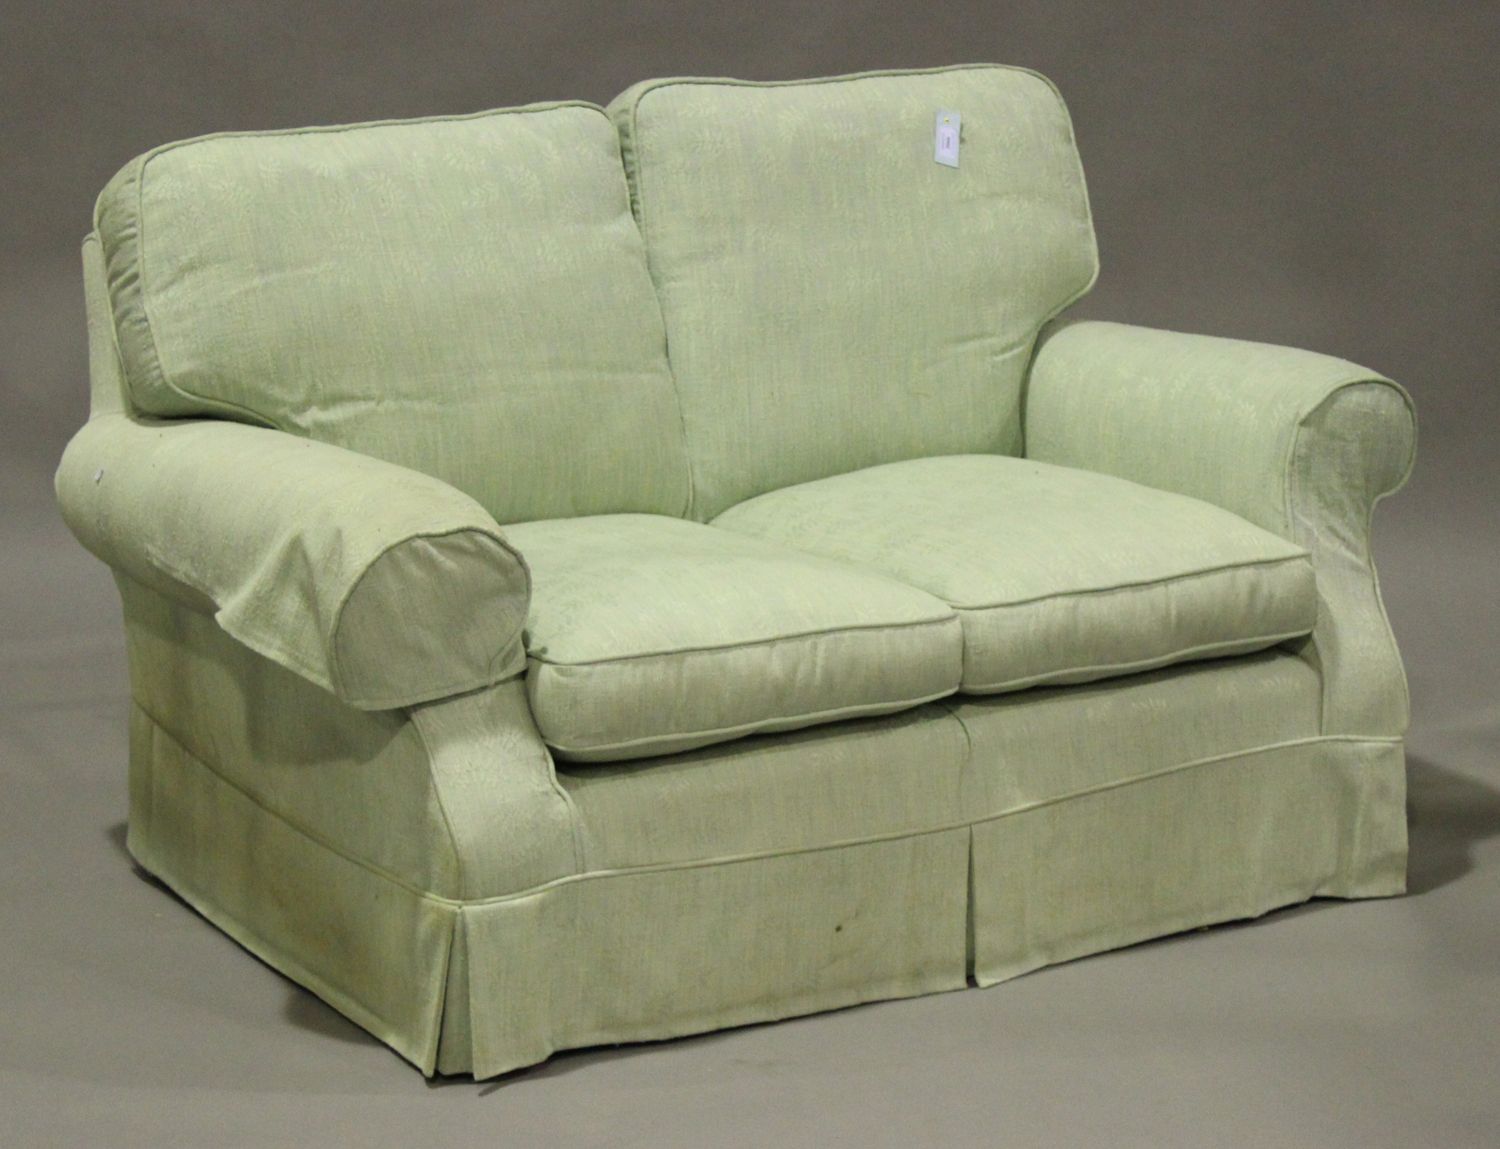 A Modern Two Seat Sofa With Removable Covers, Height 88Cm In Sofas With Removable Covers (View 5 of 15)